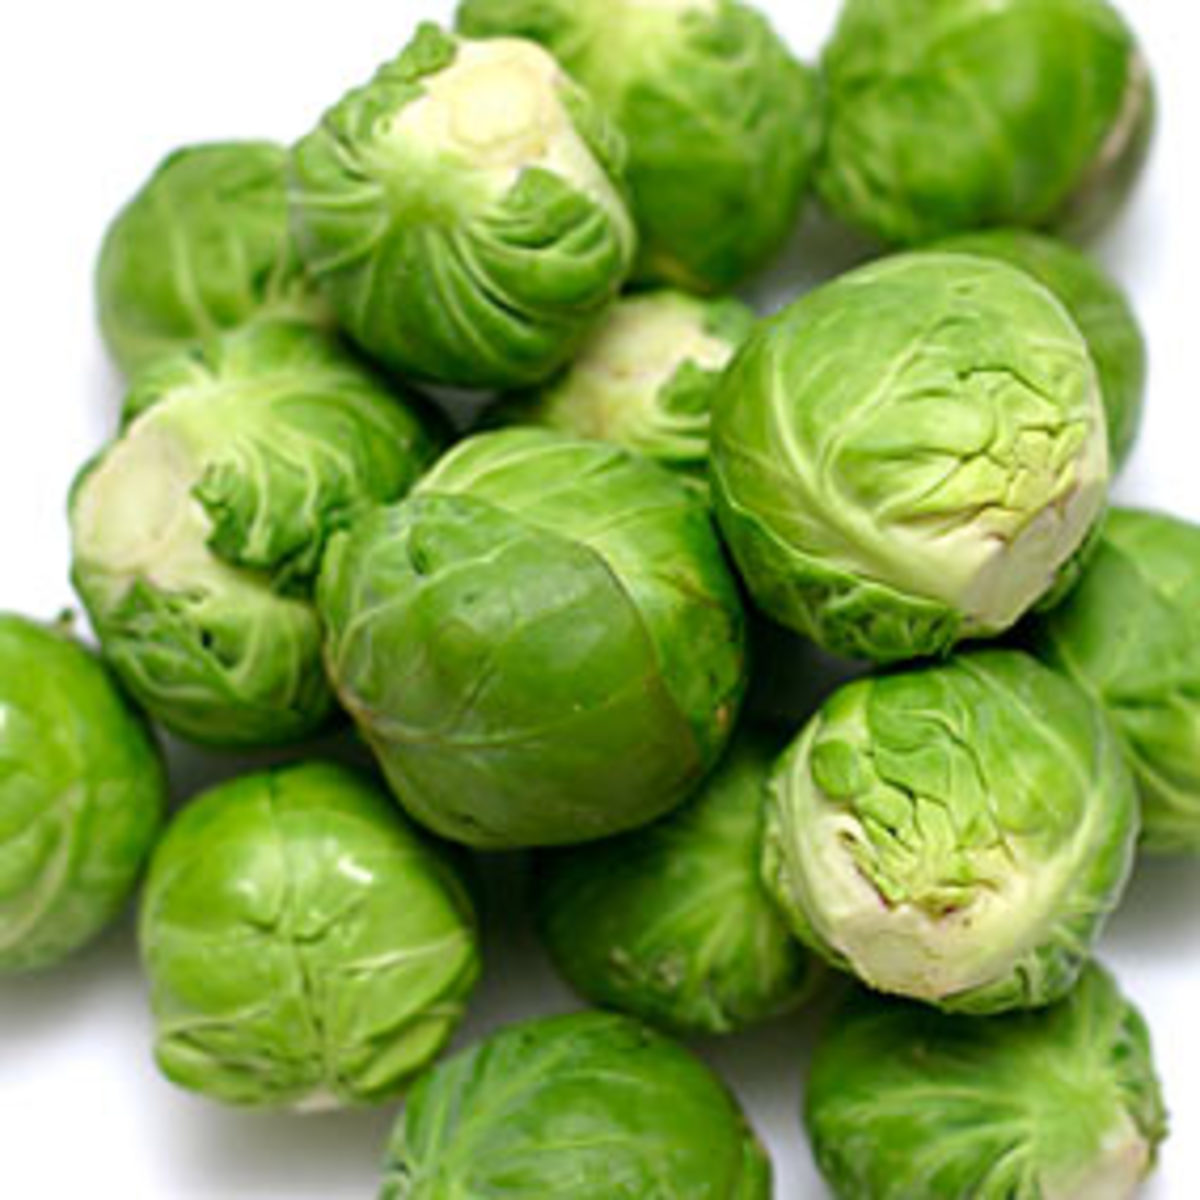 Brussels sprouts come to us by way of Brussels, Belgium